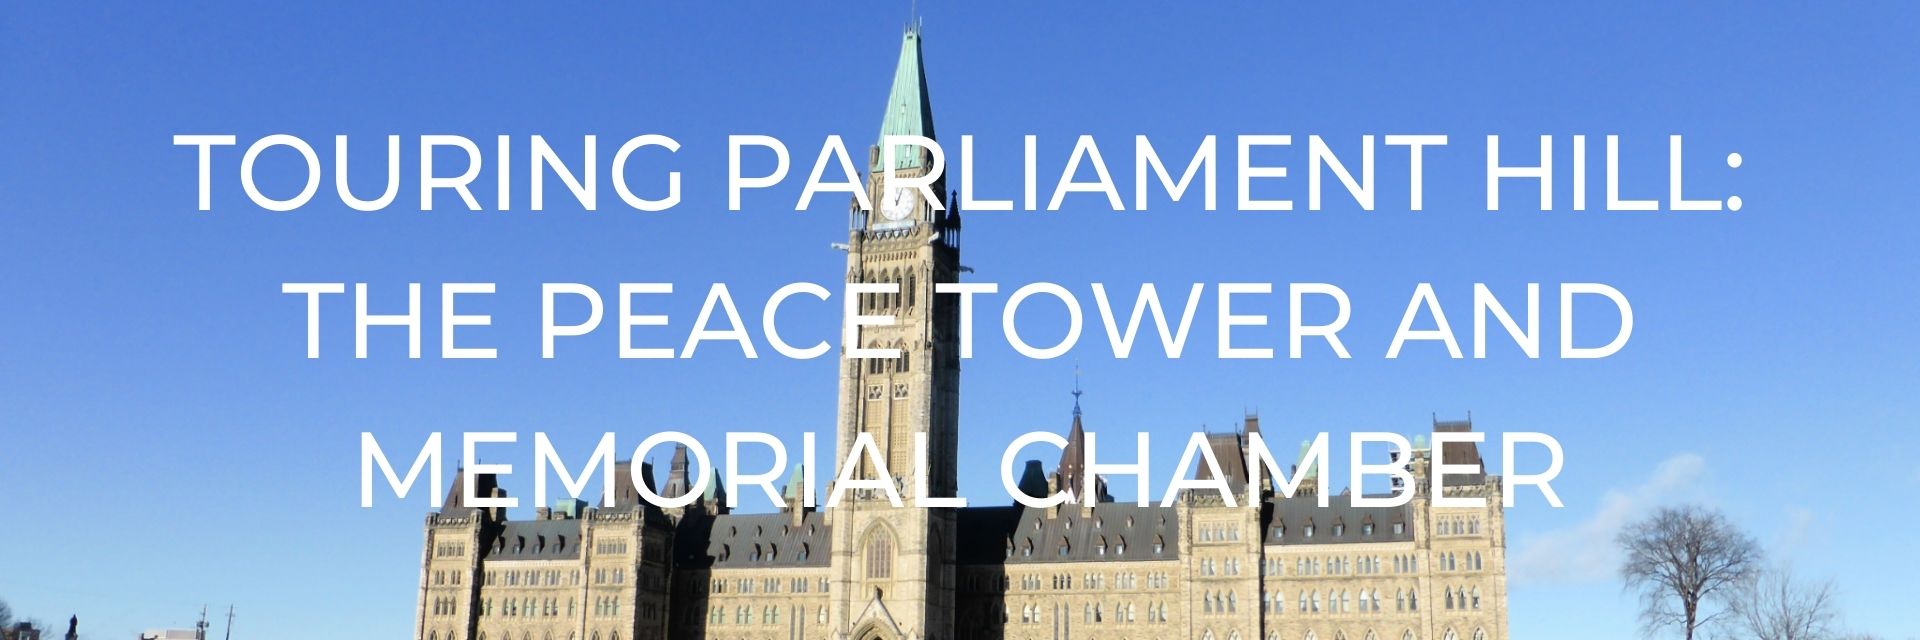 Touring Parliament Hill - Peace Tower and Memorial Hall Desktop Header